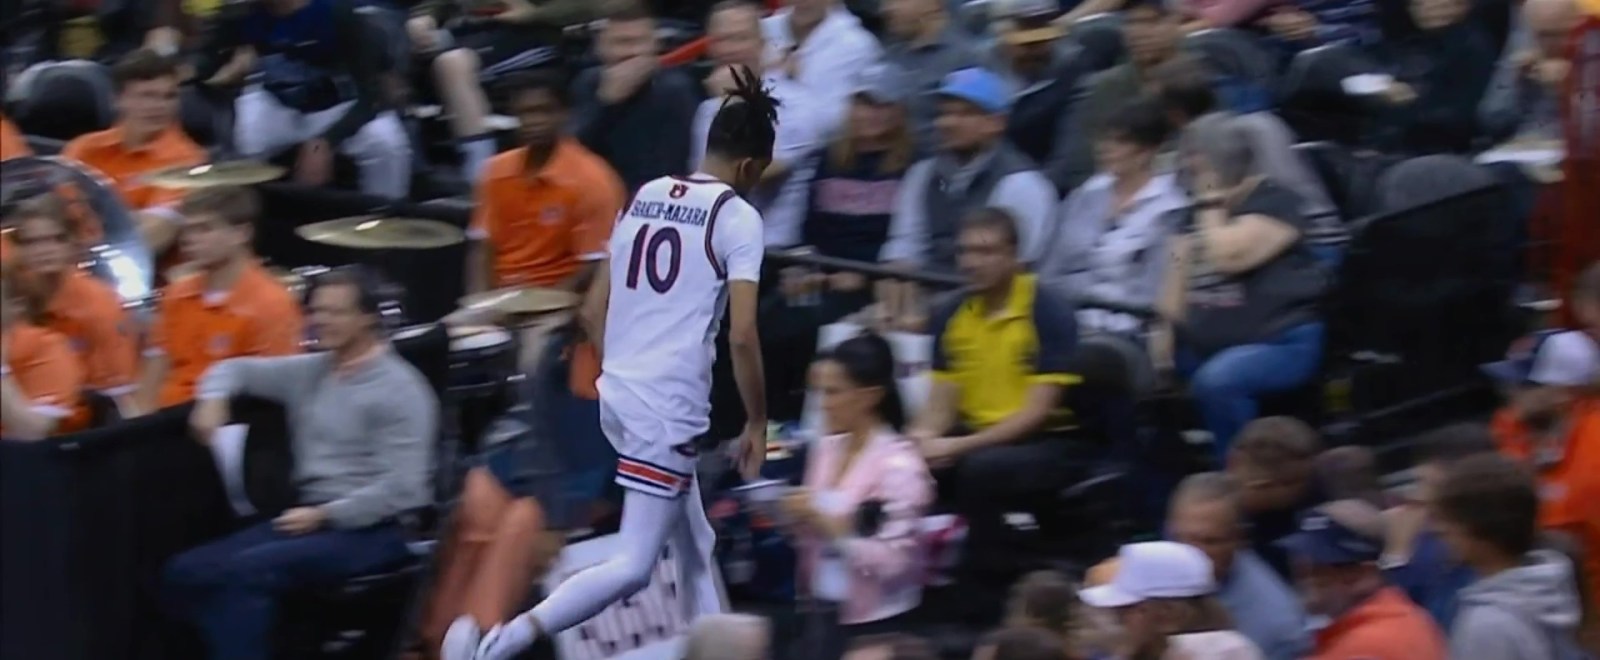 An Auburn Player Received A Flagrant 2 And Got Ejected For Throwing An Elbow Against Yale